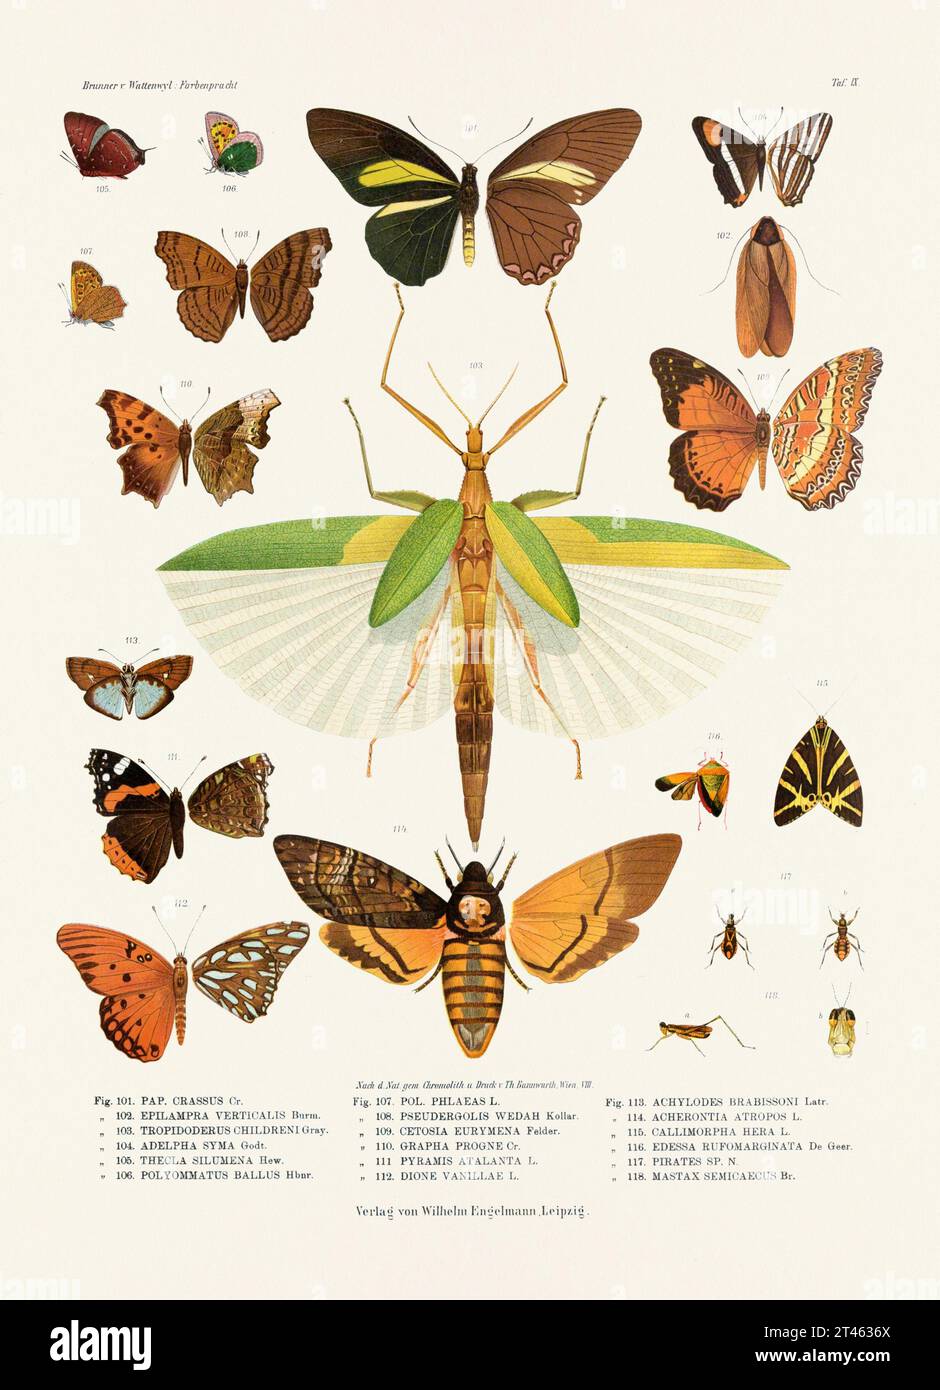 A vintage insect illustration from a 19th-century German book plate showcasing the coloration of various insect species. Butterflies, Moths, Locusts, Stock Photo